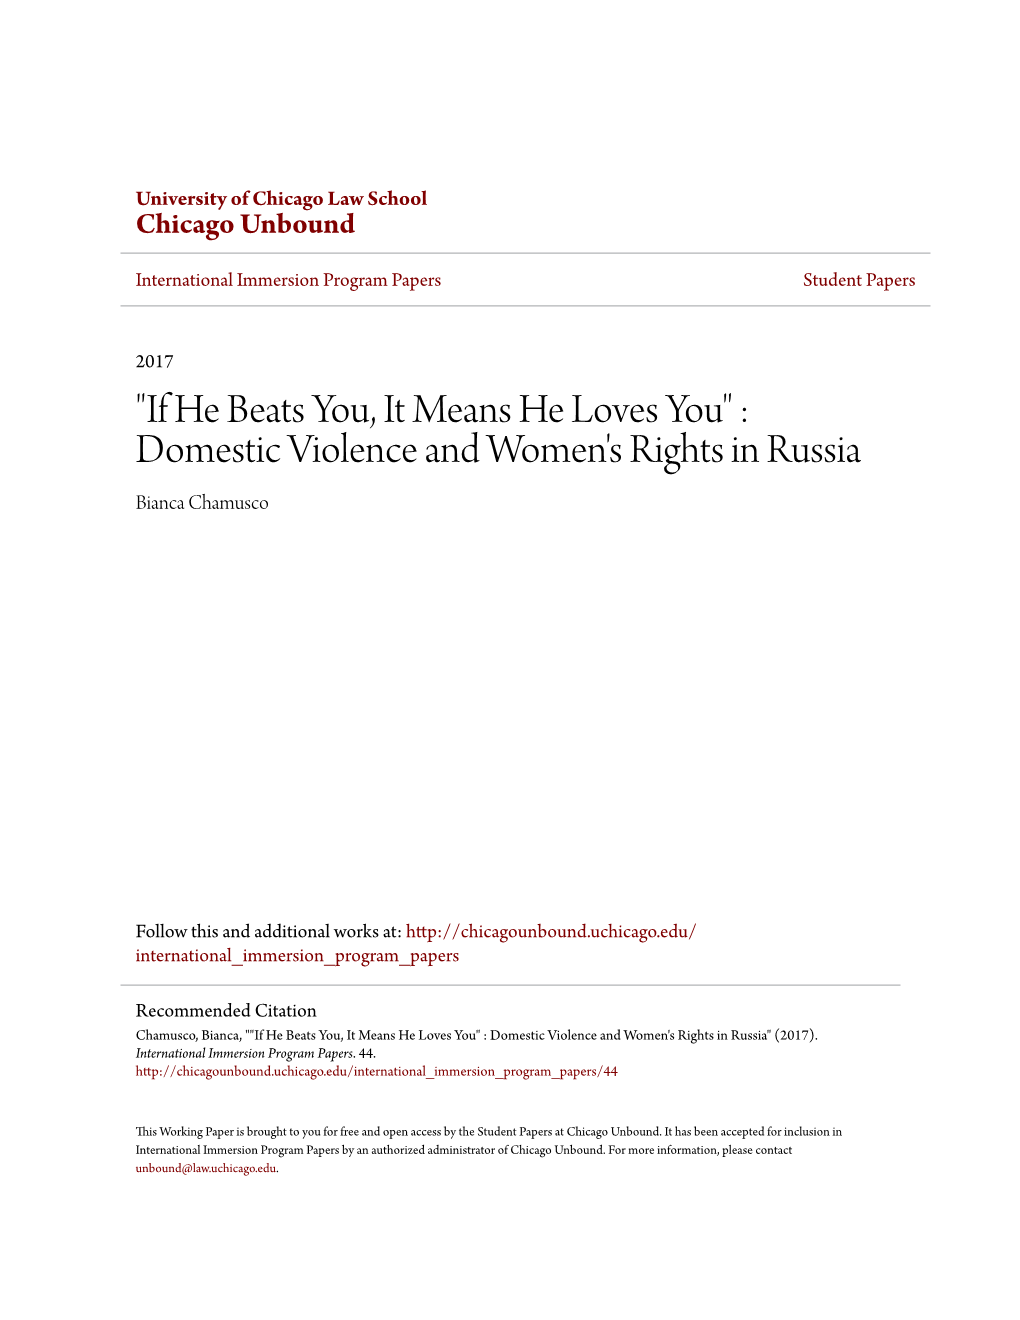 Domestic Violence and Women's Rights in Russia Bianca Chamusco